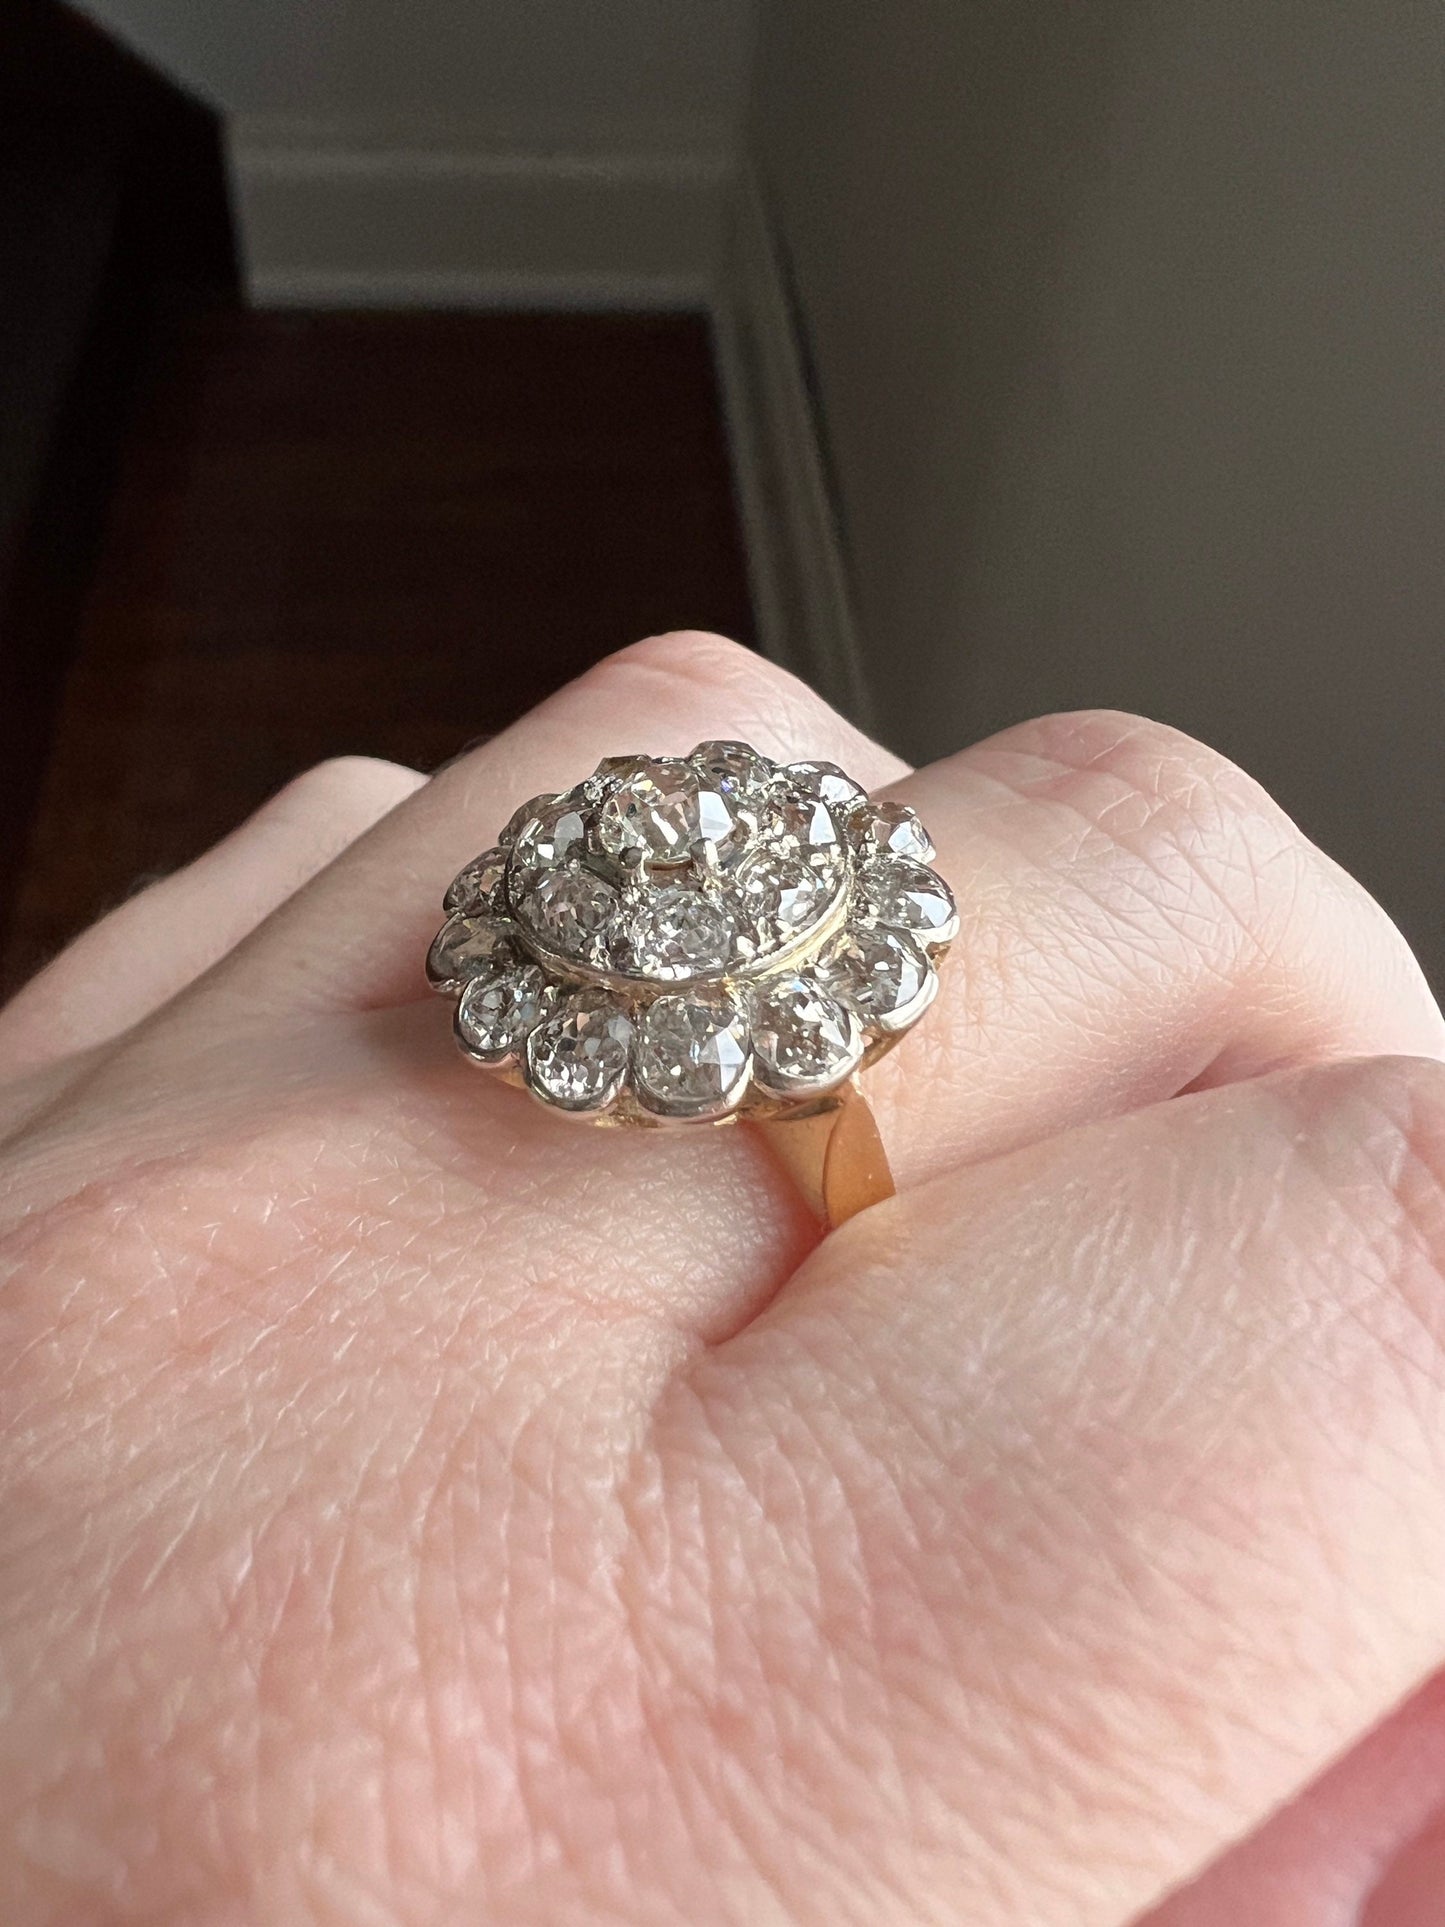 Large FRENCH Antique 2.5 Carat + 21 Old Mine Cut DiAMOND Cluster RiNG 18k Gold Daisy Halo Stacker Romantic Gift Floral OMC Belle Epoque XL